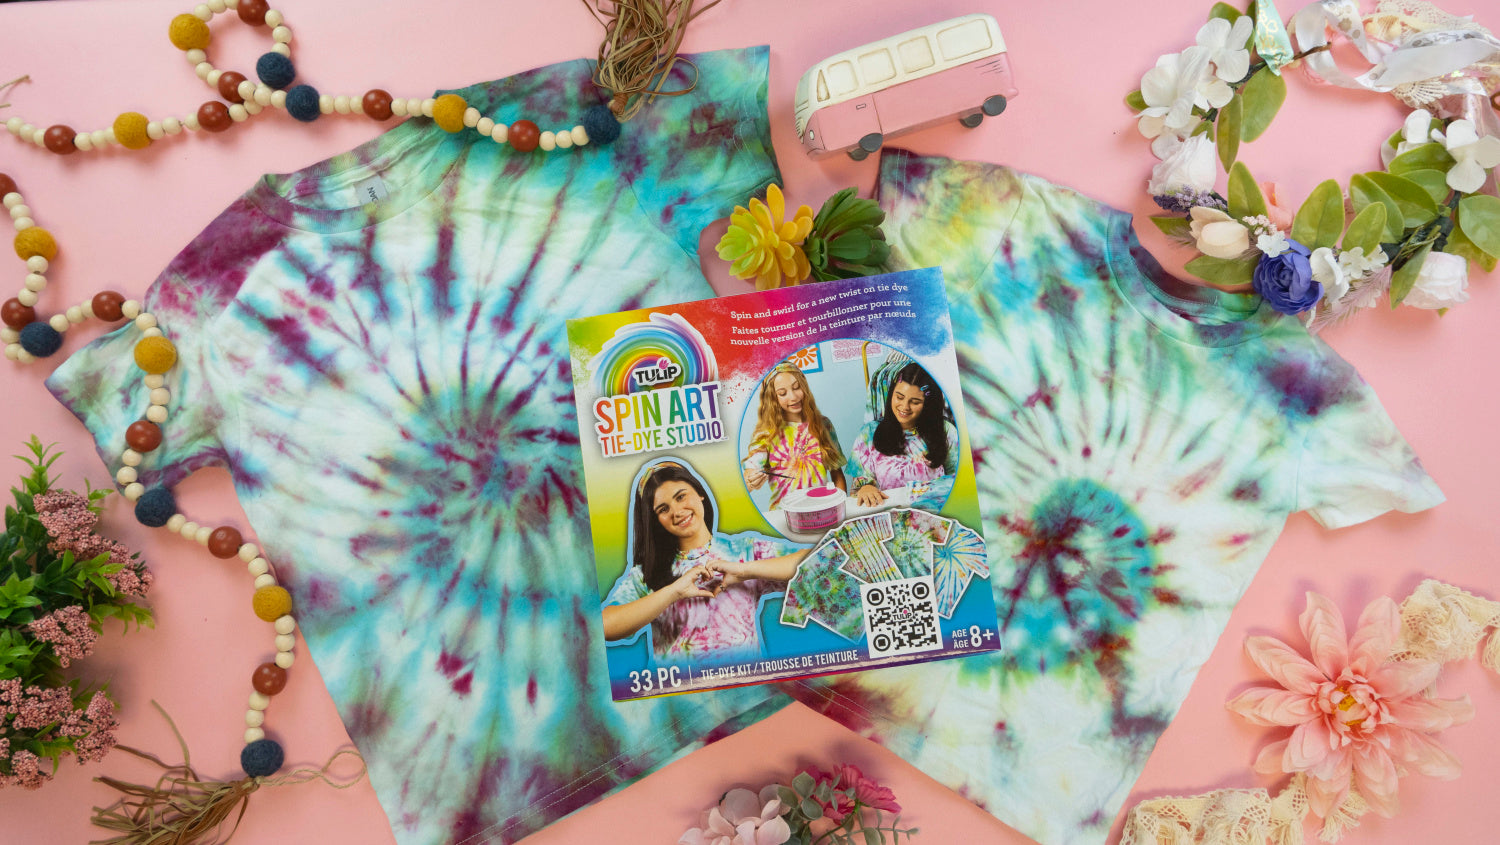 Surprise Tie-Dye T-Shirts with the Tulip Spin Art Tie-Dye Studio